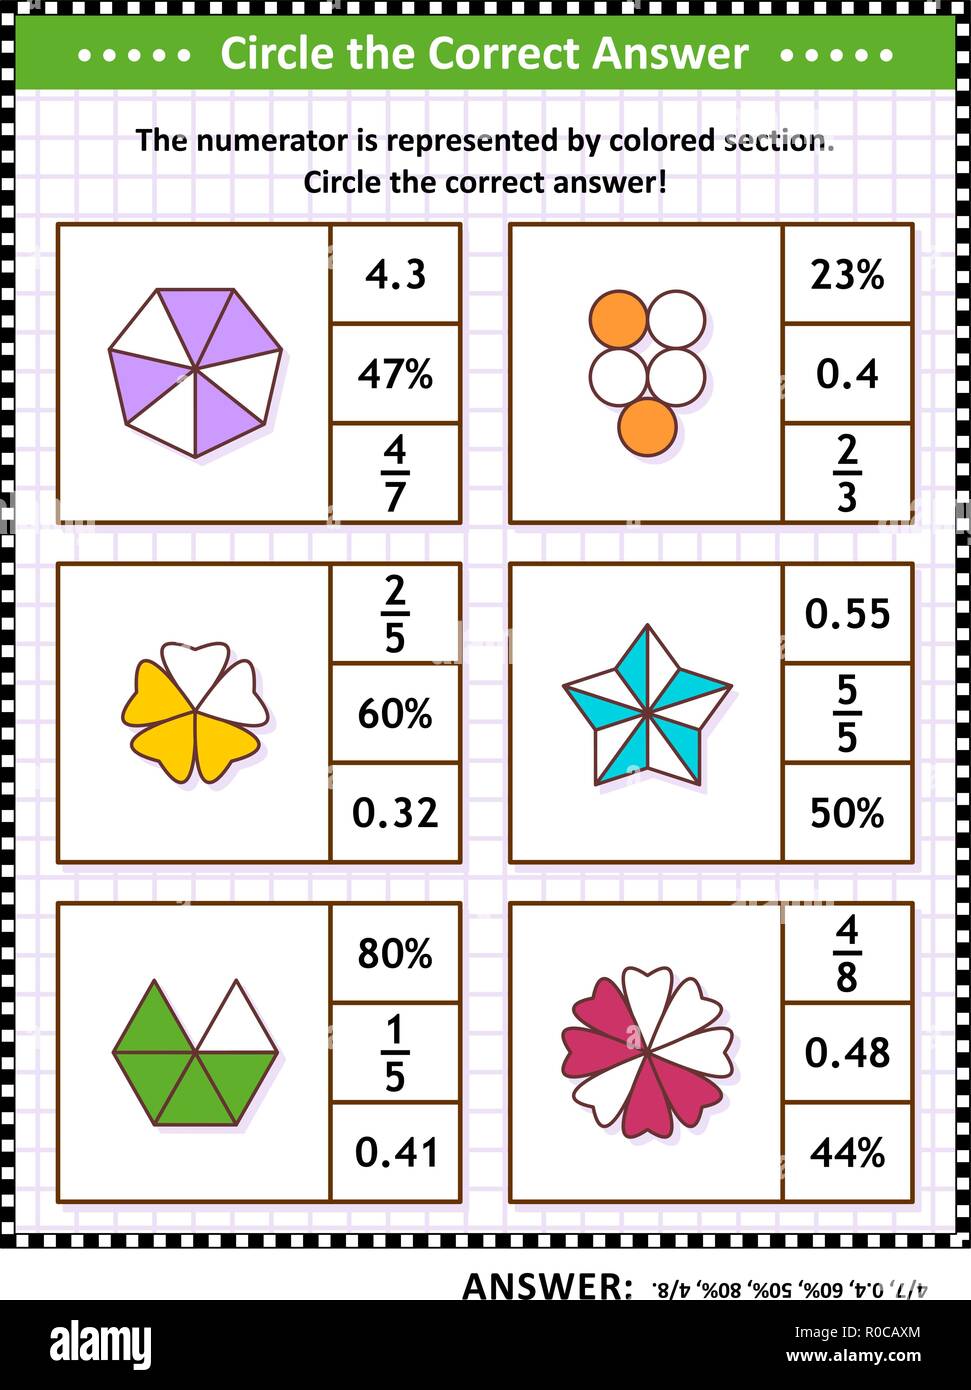 math-skills-training-visual-puzzle-or-worksheet-circle-the-correct-answer-find-the-number